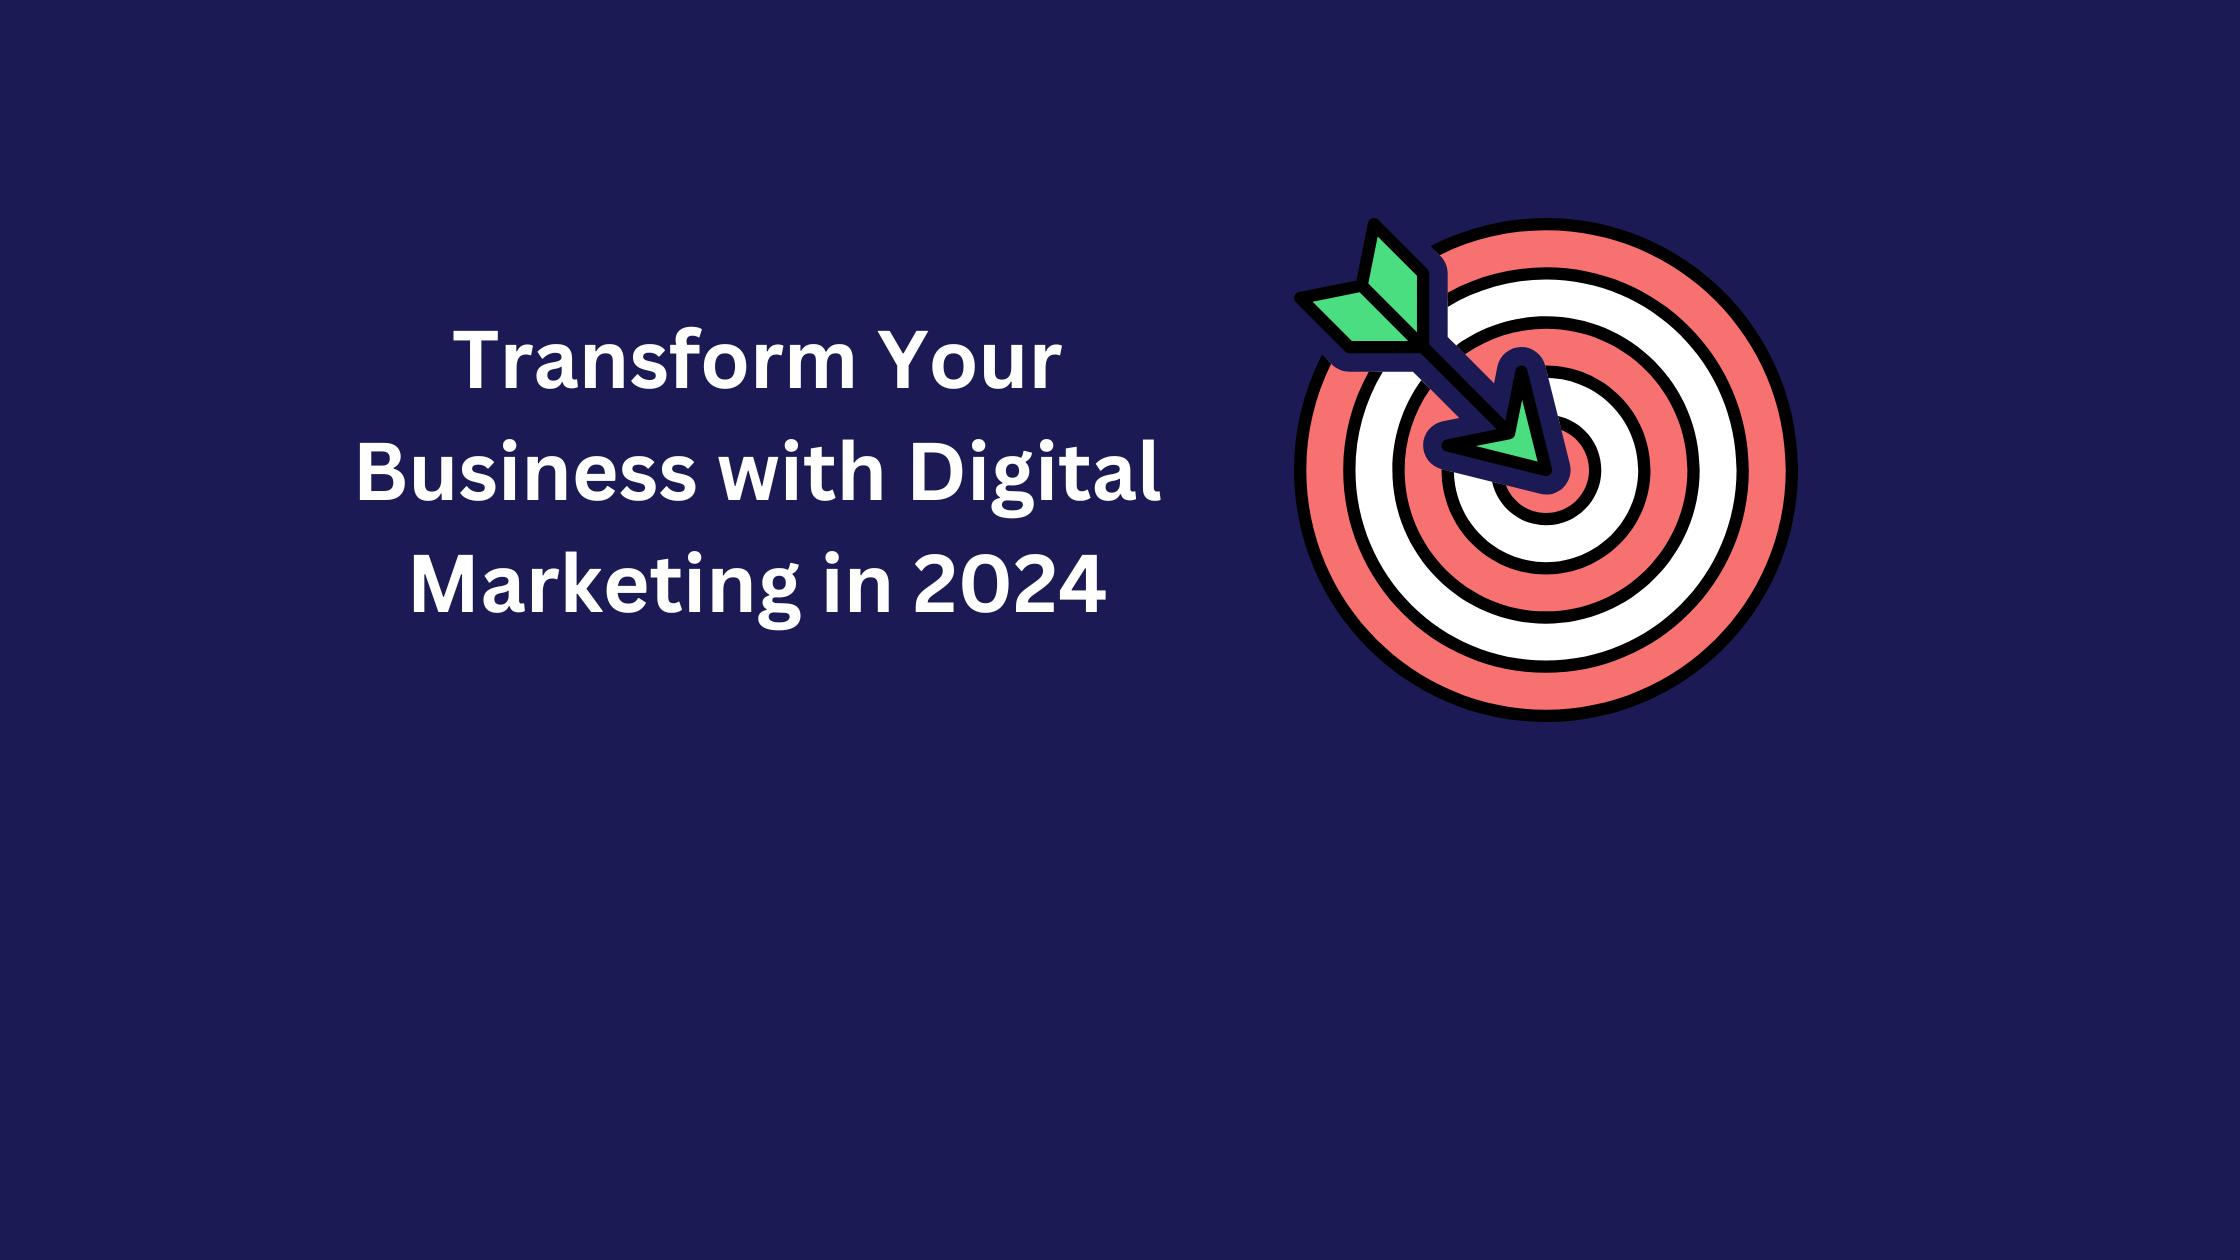 Transform Your Business with Digital Marketing in 2024